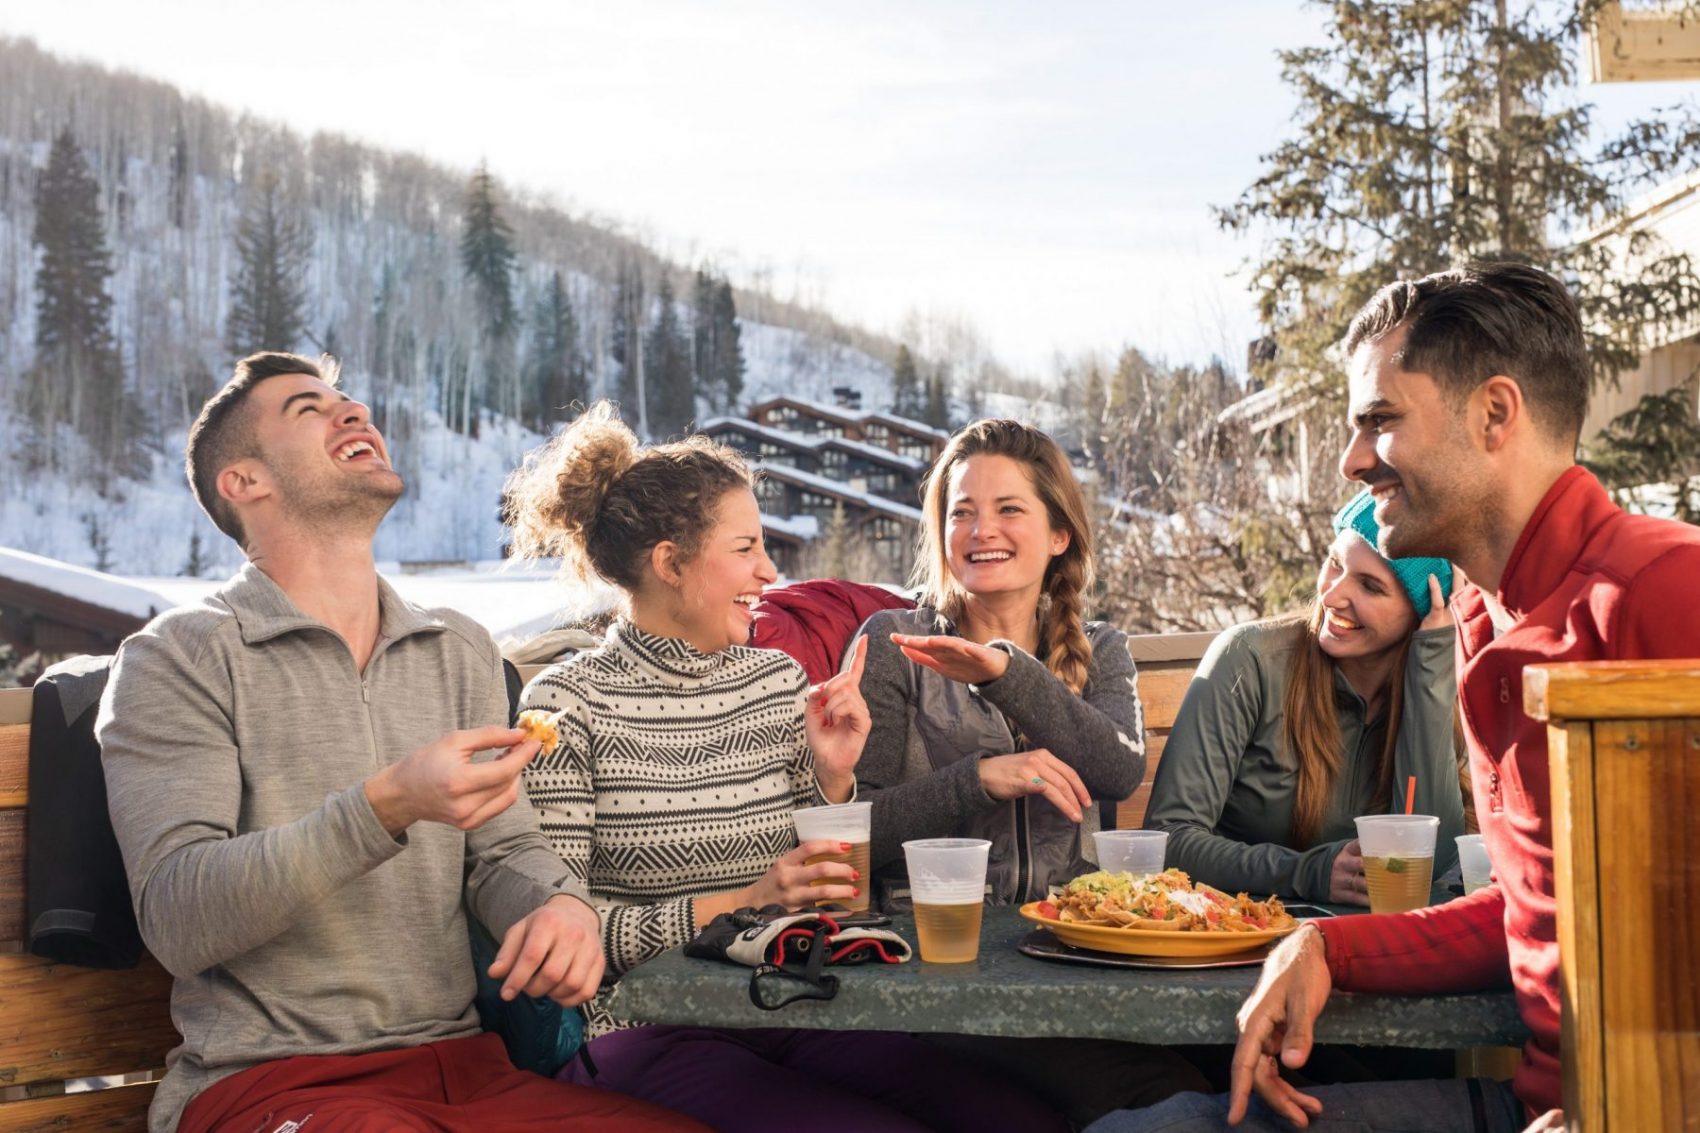 Some friends enjoy après after skiing in Vail, CO. Photo: Craig Orsini. Vail Resorts. The Must-Read Guide to Vail.